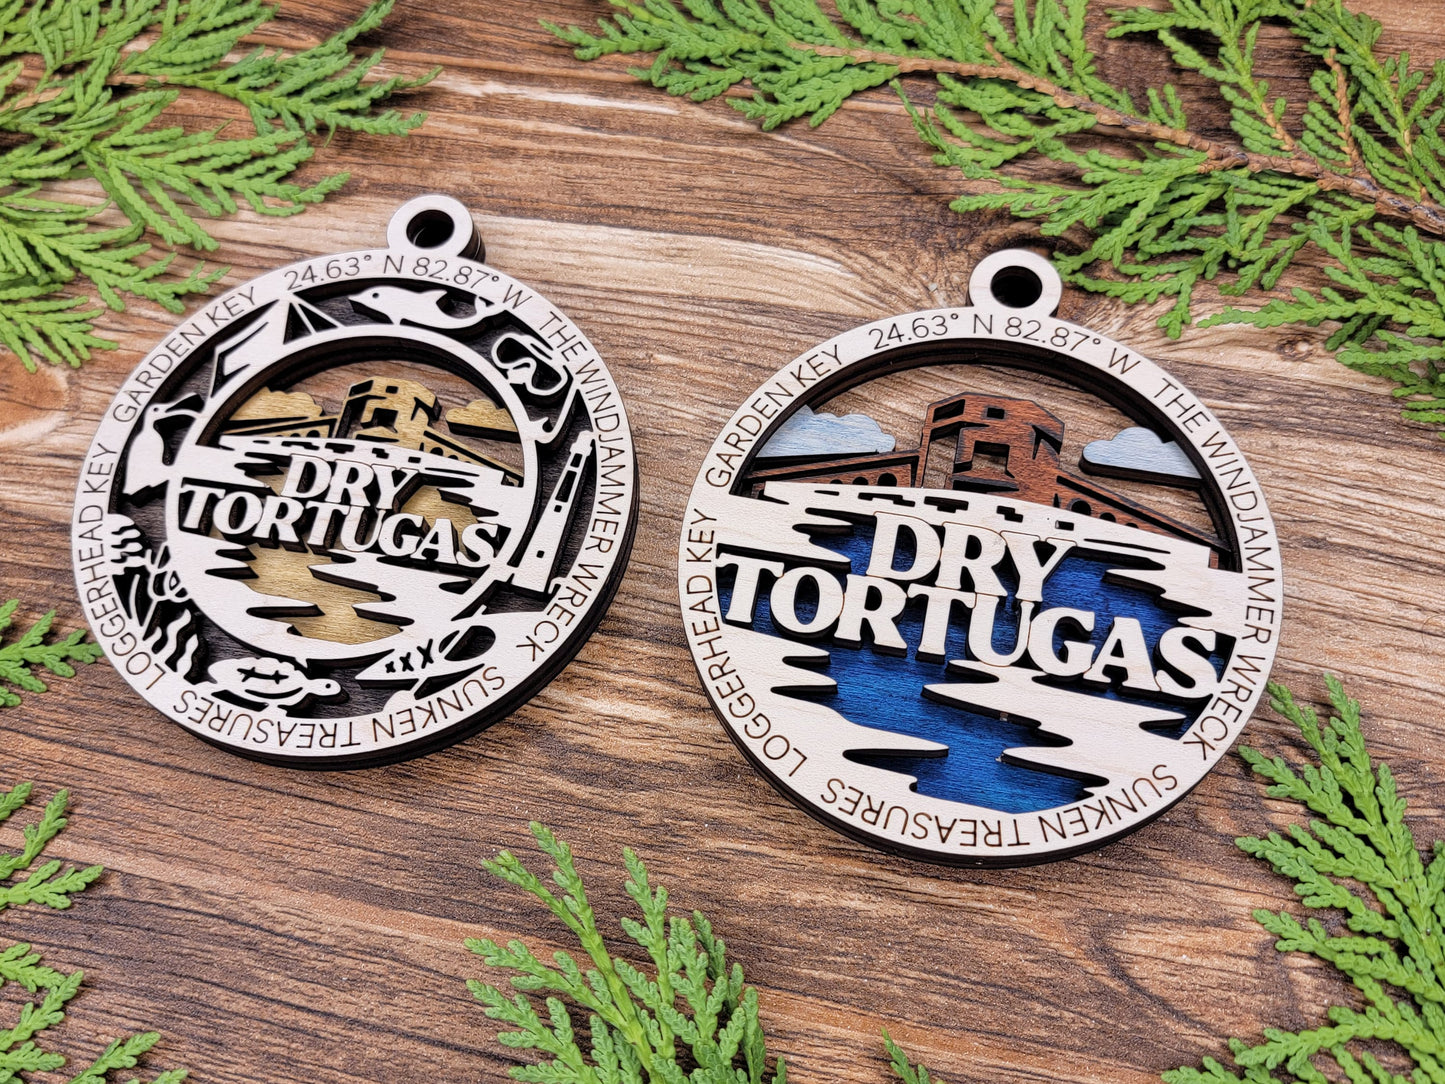 Dry Tortugas Park Ornament - Includes 2 Ornaments - Laser Design SVG, PDF, AI File Download - Tested On Glowforge and LightBurn